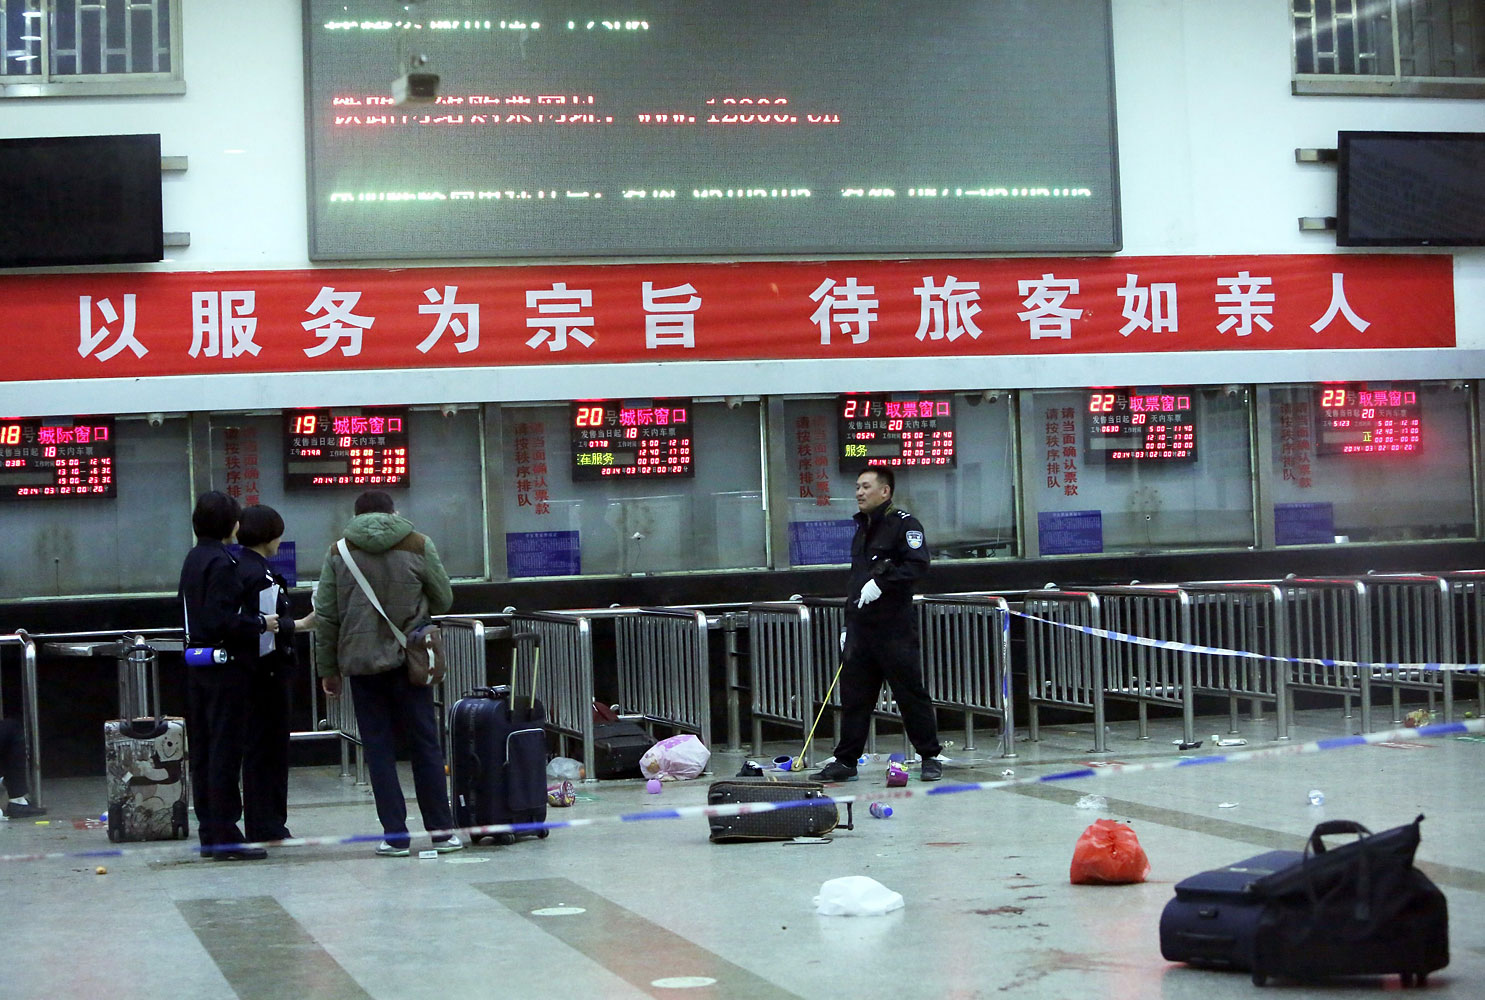 Chinese police investigators inspect the scene of an attack at the railway station in Kunming, southwest China's Yunnan province, on March 2, 2014.